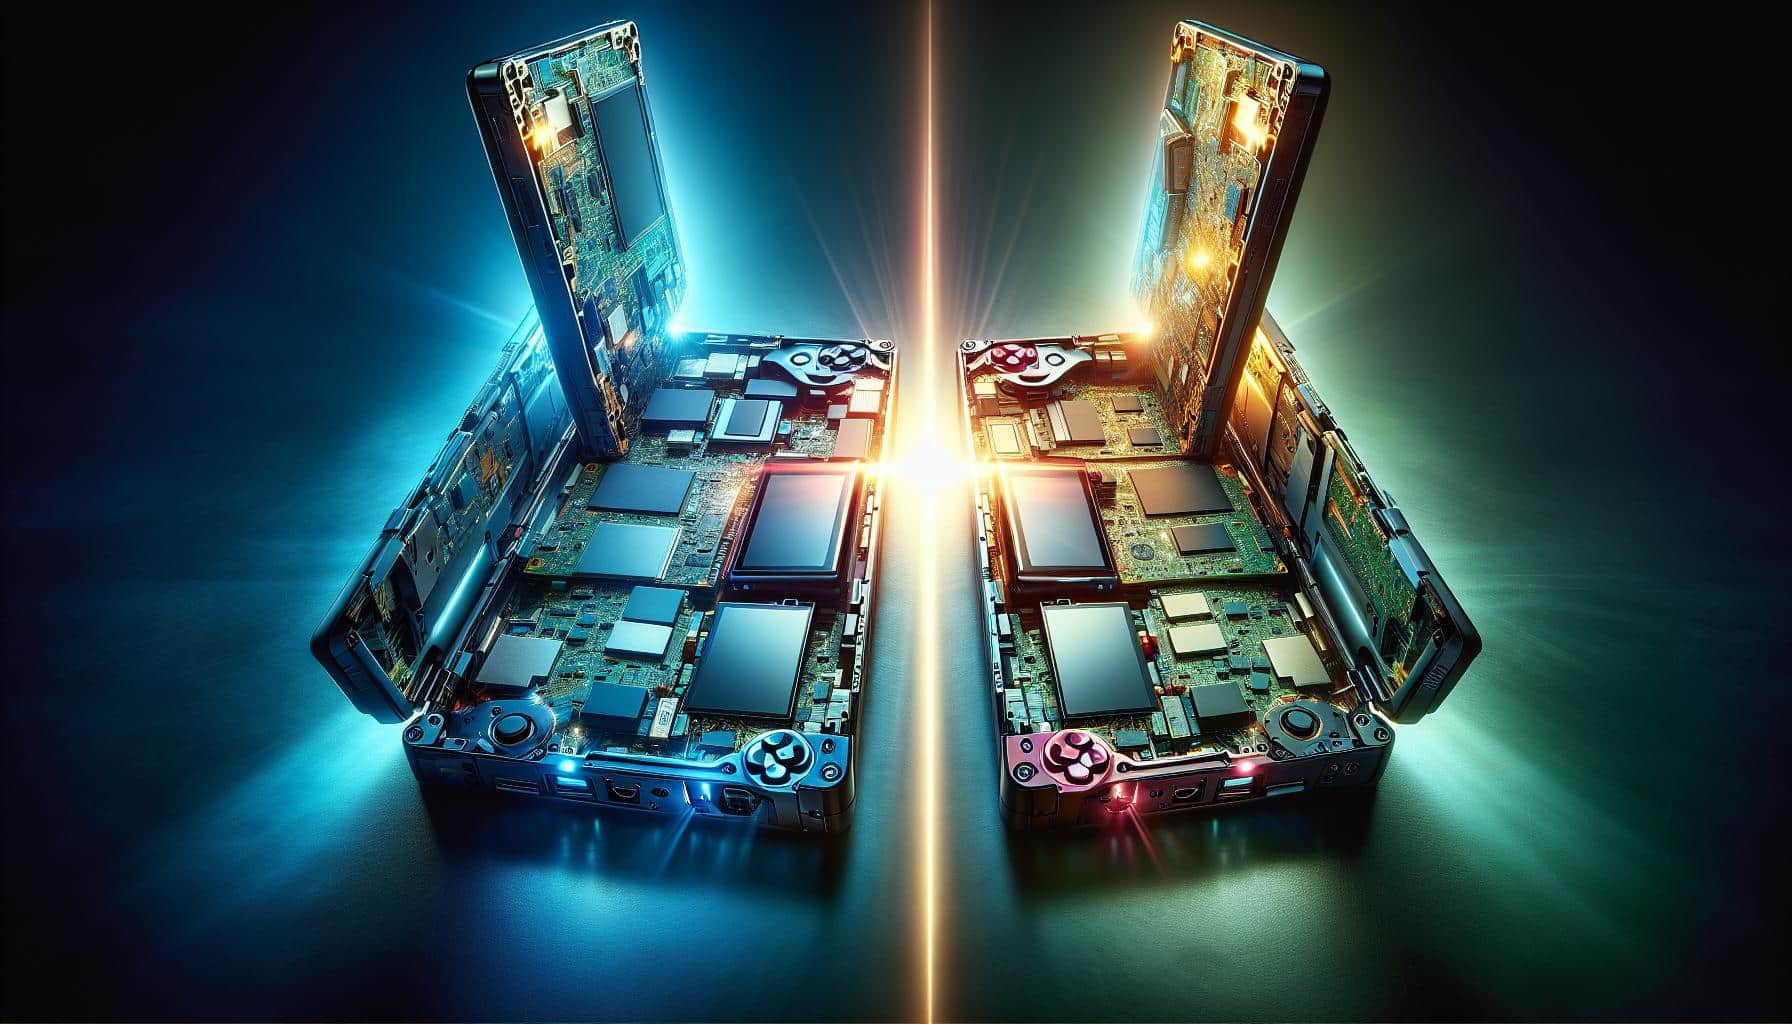 "MSI Claw vs. Steam Deck: Comparing Handheld Gaming PCs" | FinOracle